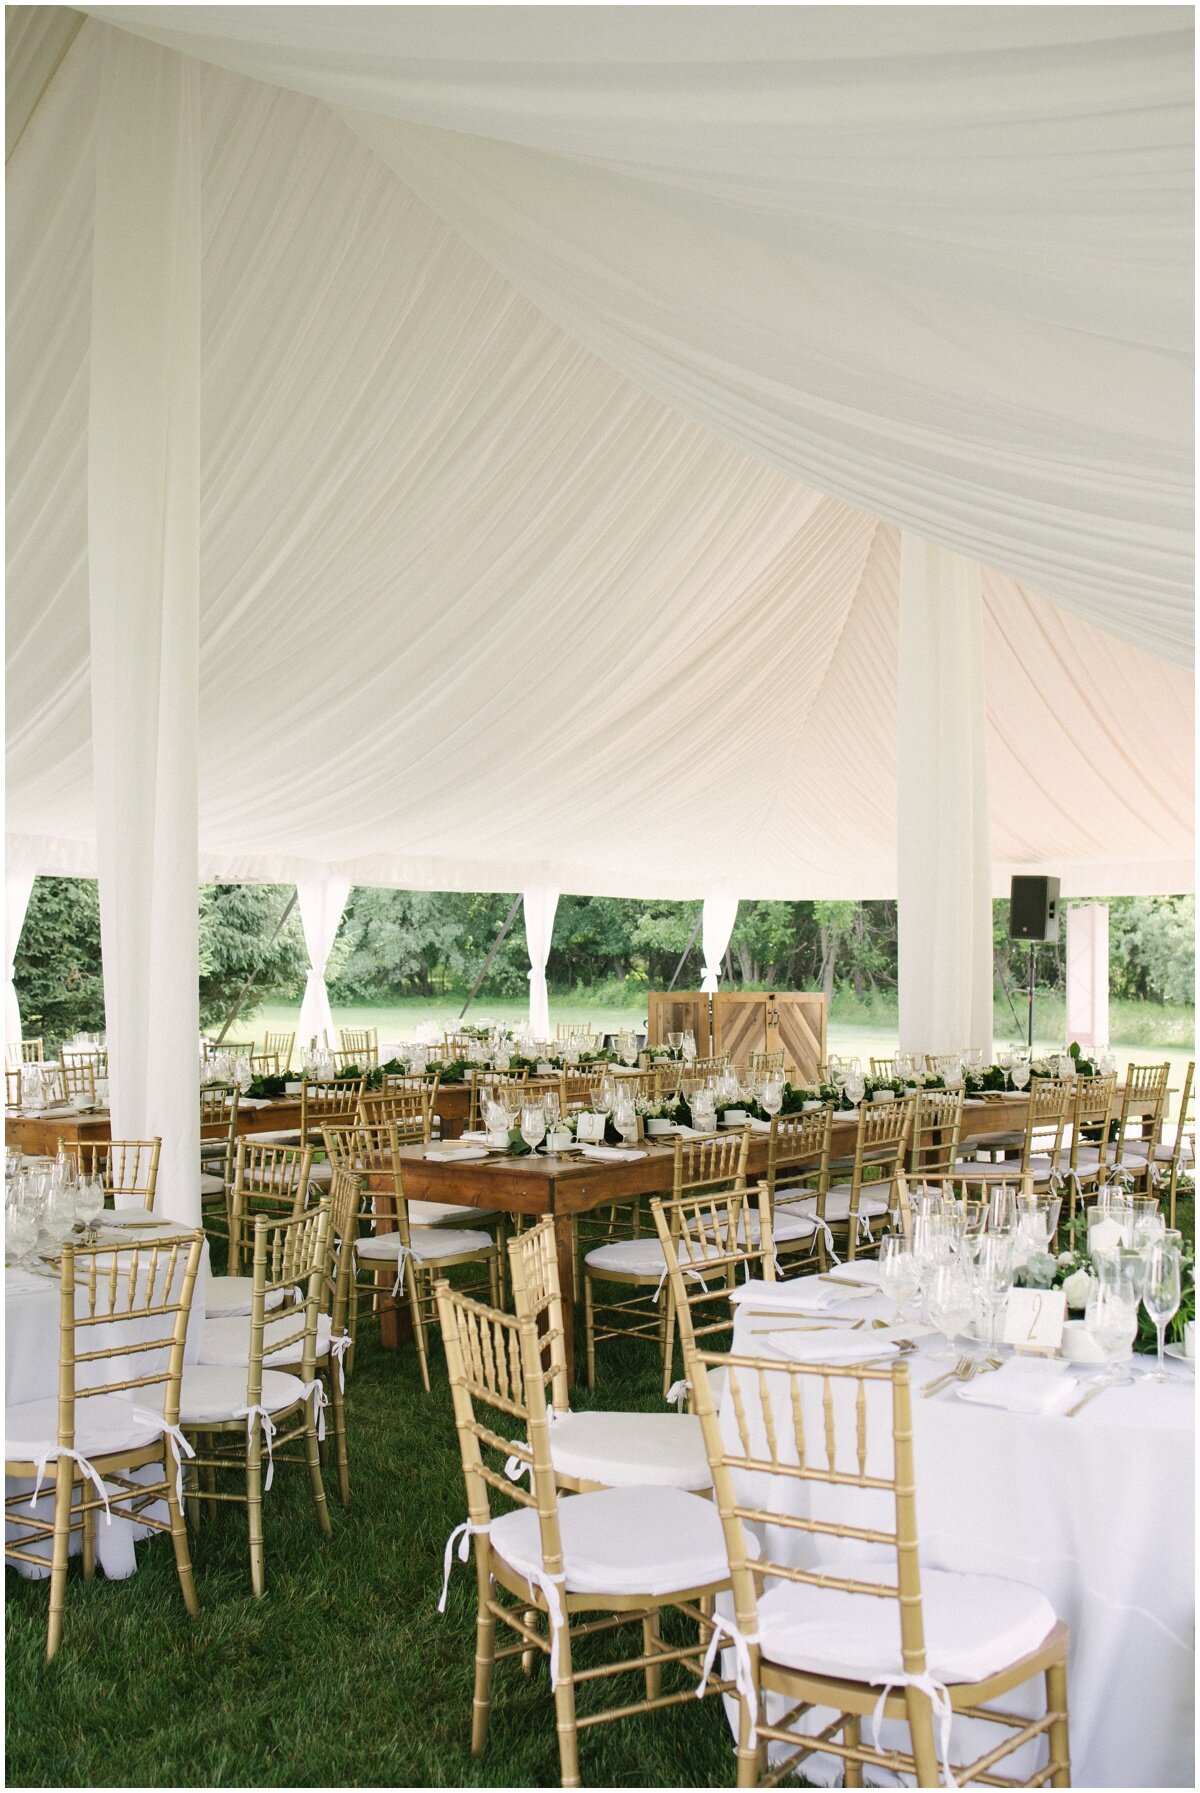  Tented wedding with white drape, mixed table size, gold chairs, white centerpiece at private estate wedding 